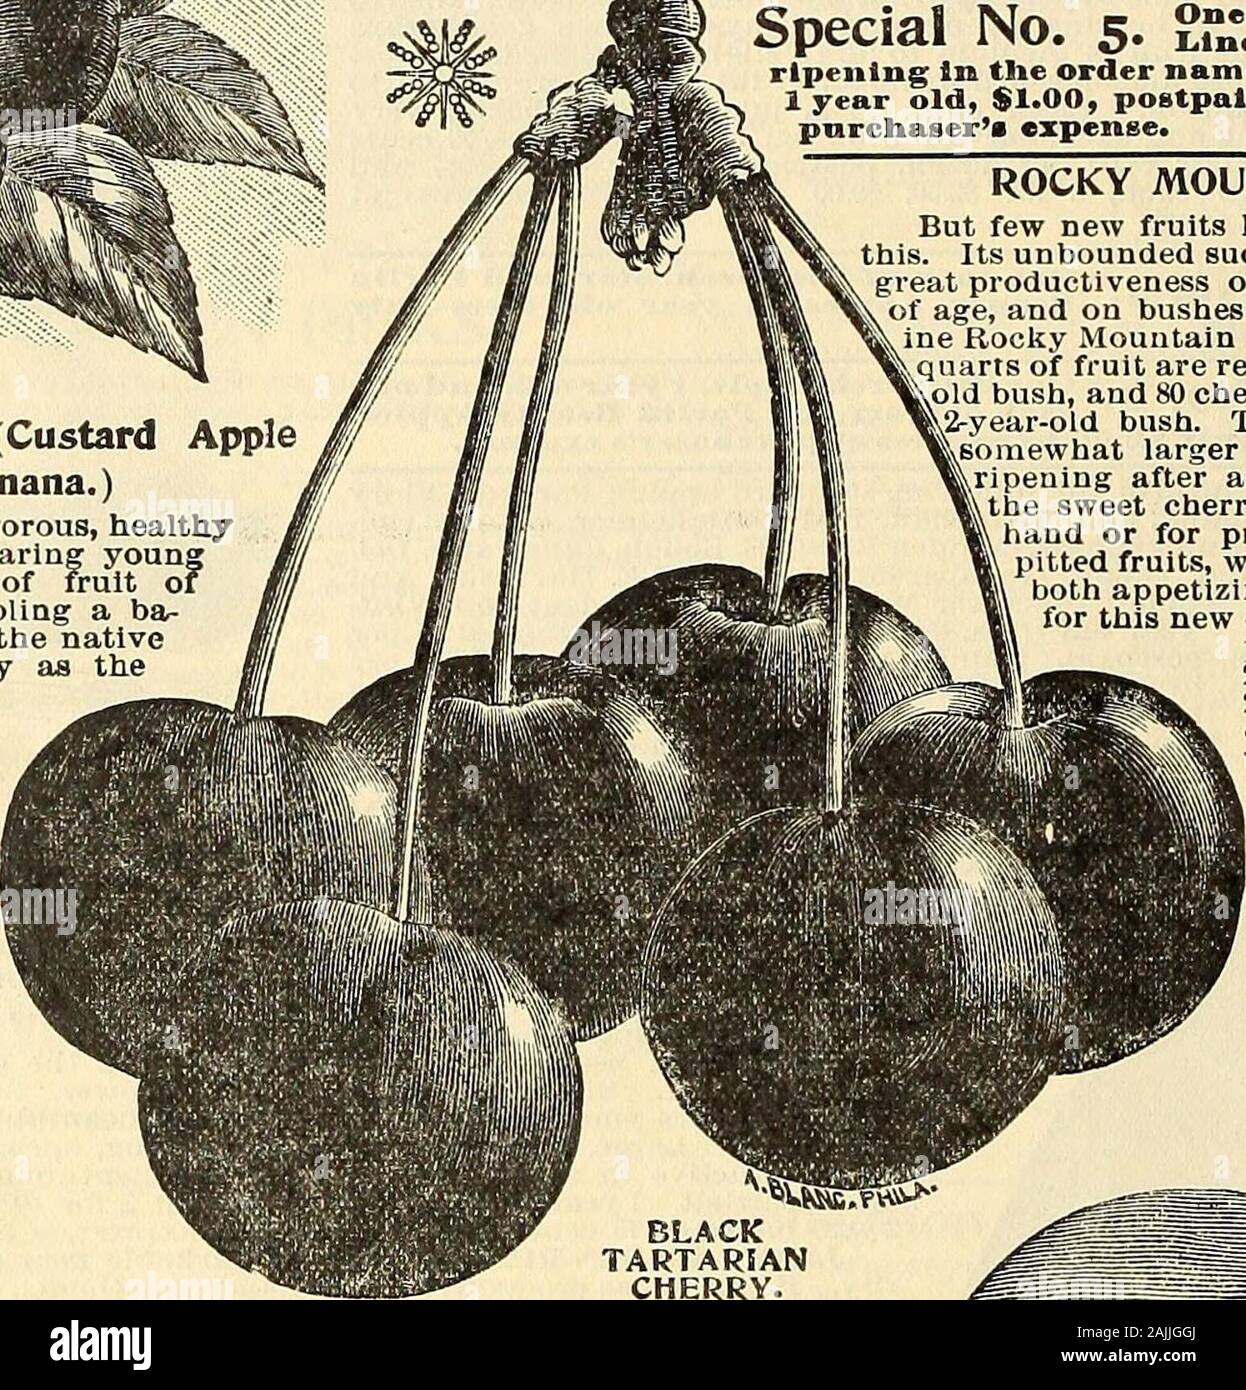 Maule's seed catalogue : 1896 . snma Blood. 4 ripening In tlie order named and coverlne tlie entire season, 3 1 year old, $1.00, postpaid; ii-year-old, $1.50, by express at - pnrctiasers expense. 2 PAW PAW TREE. (Custard Appleor Northern Banana The Paw Paw Tree Is vigorous, healthyand handsome, comes to bearing youngproducing an abundance of fruit oftropical appearance resembling a ba-nana and described among the nativefruits of Mississippi valley as thePrince of fruit - bearingshrubs, and further statesThe pulp of the fruTt re-eembles Egg Custard in con-slstancy and appearance.It has the same Stock Photo